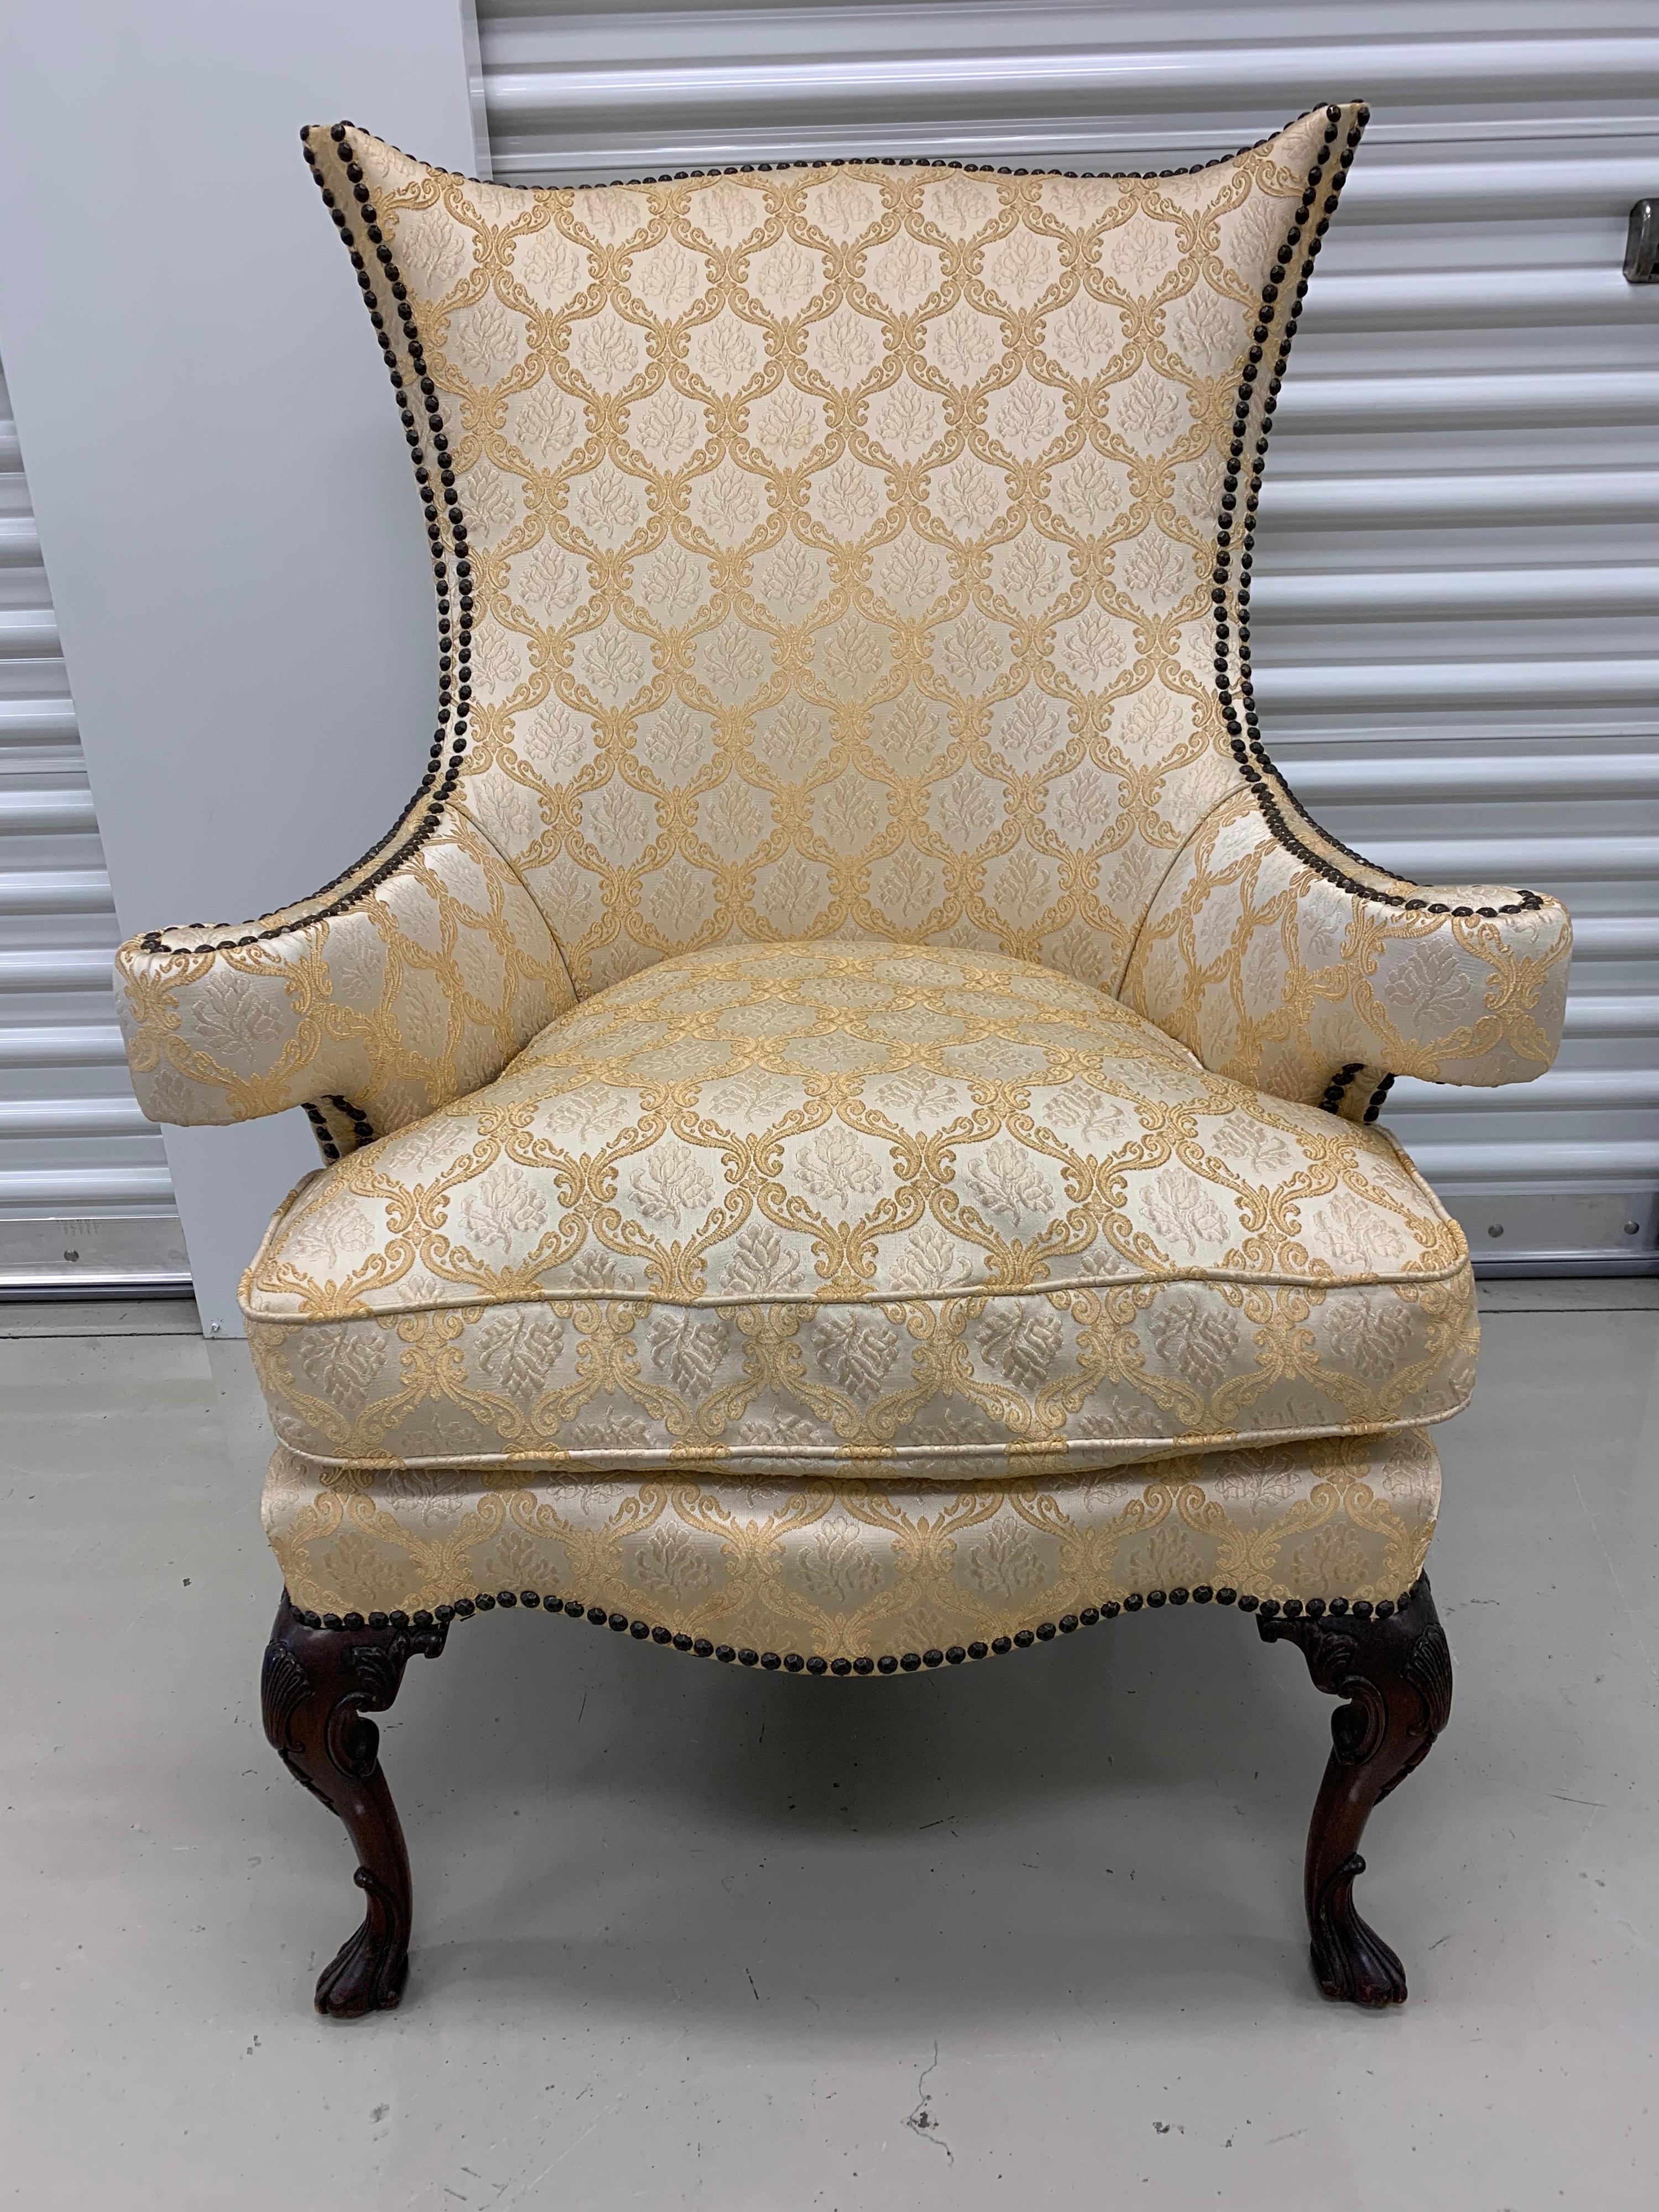 Nothing short of stunning is this Louis XVI armchair with gold and silver brocade fabric adorned by nailheads. The fabric is recent and exceptional.